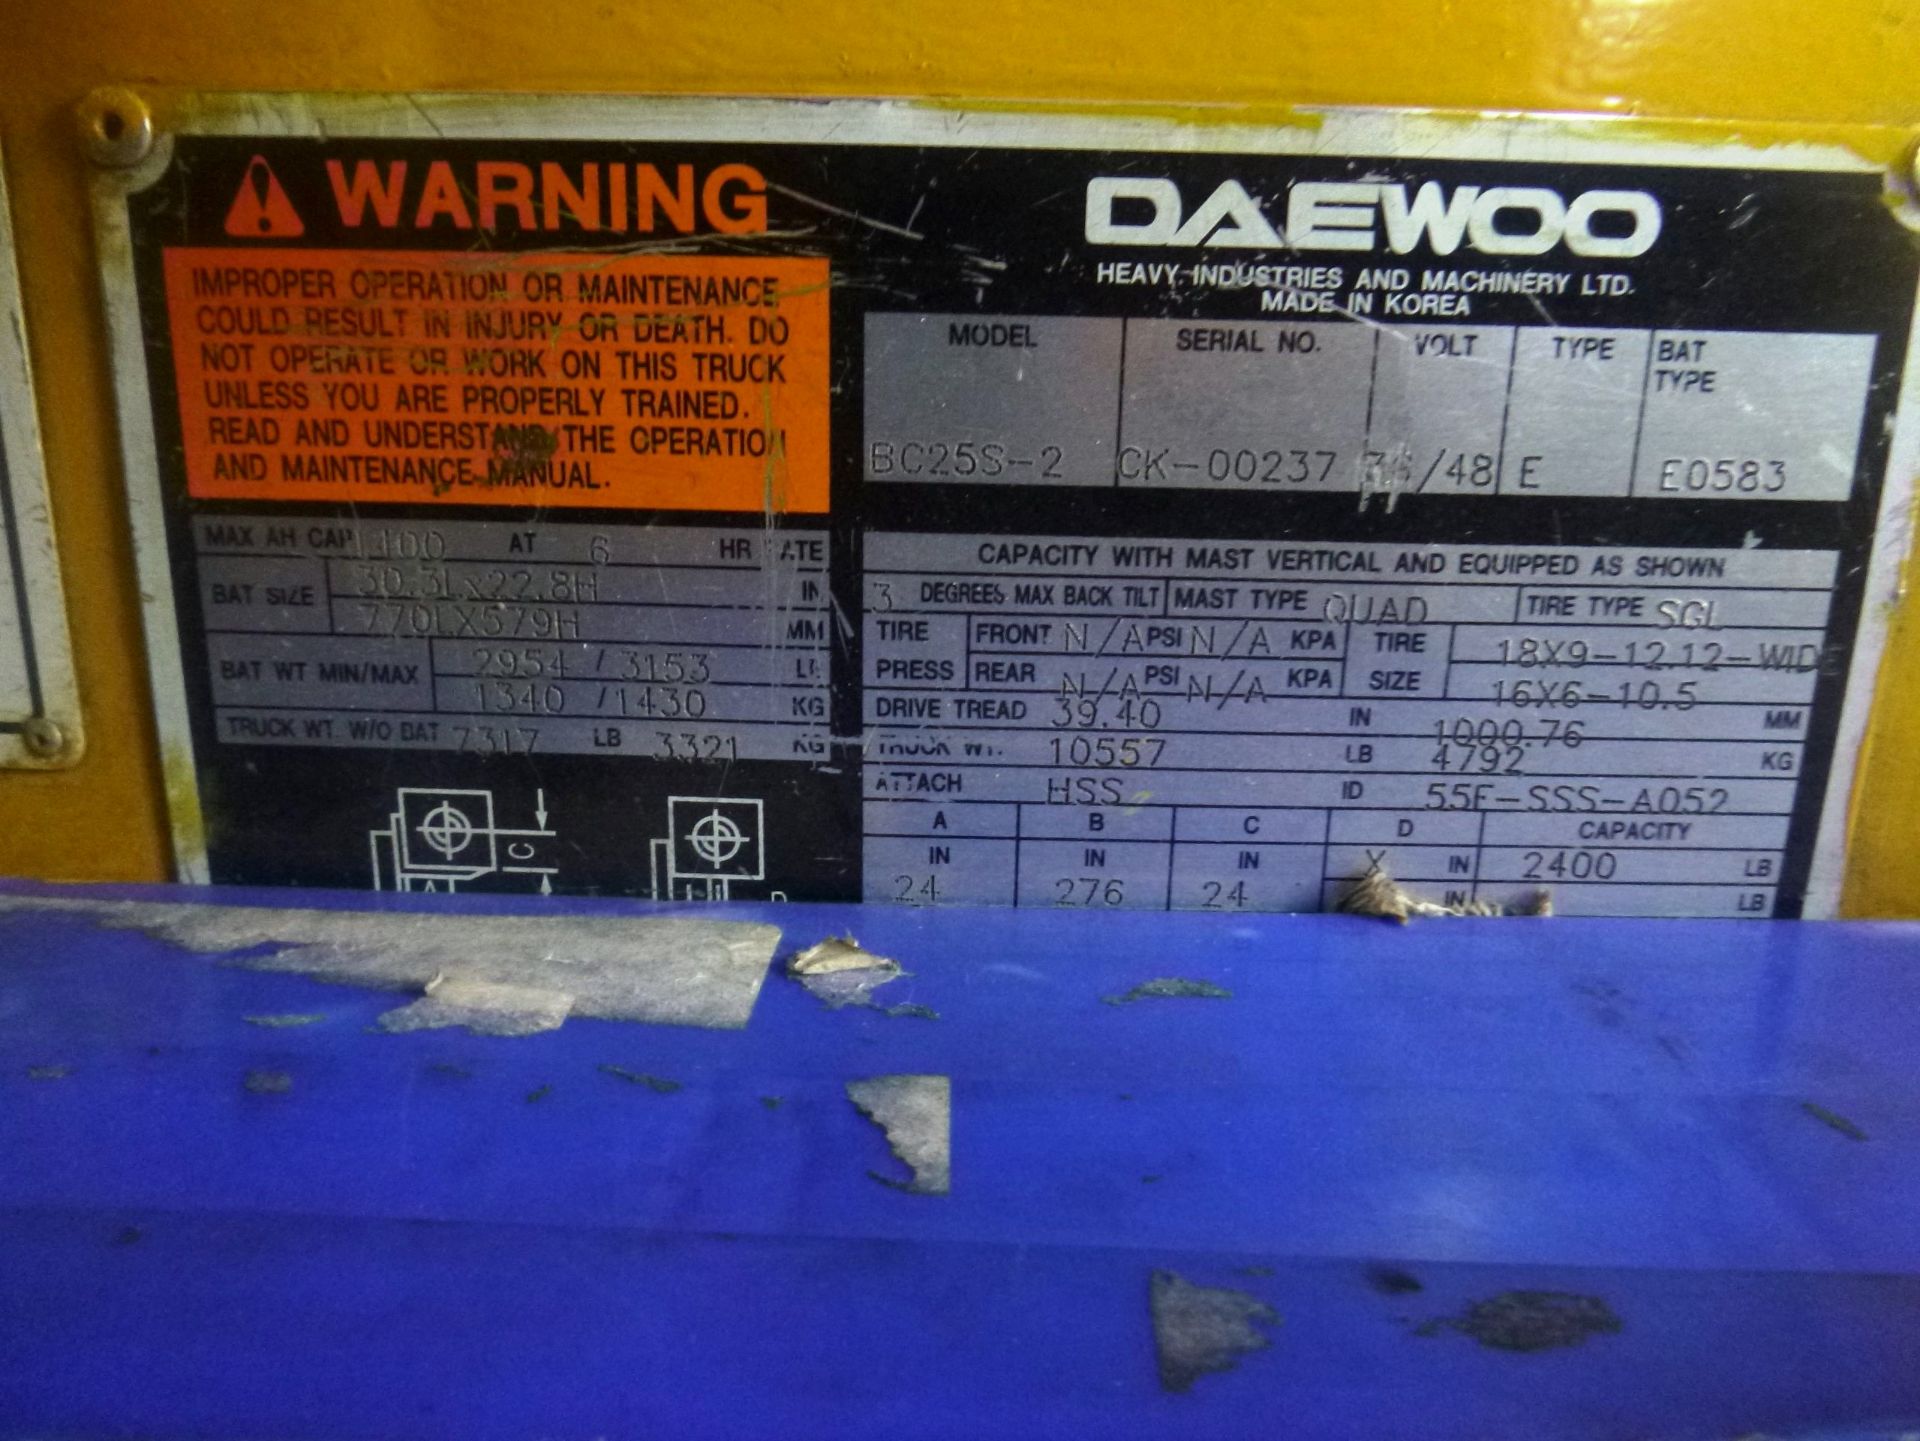 Daewoo Electric Forklift (Restricted Removal: Not available for removal until after May 1st.) - Image 4 of 5